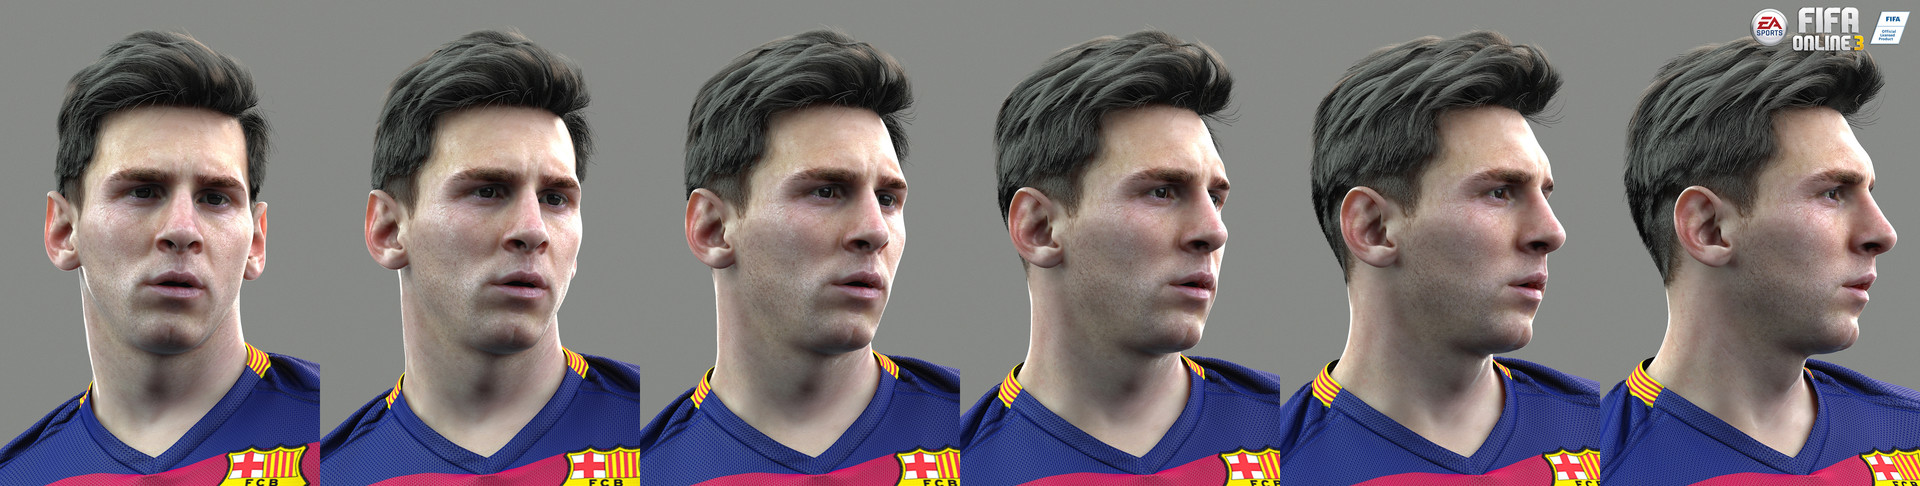 Fine Art: Messi, You Looked Better Without The Beard